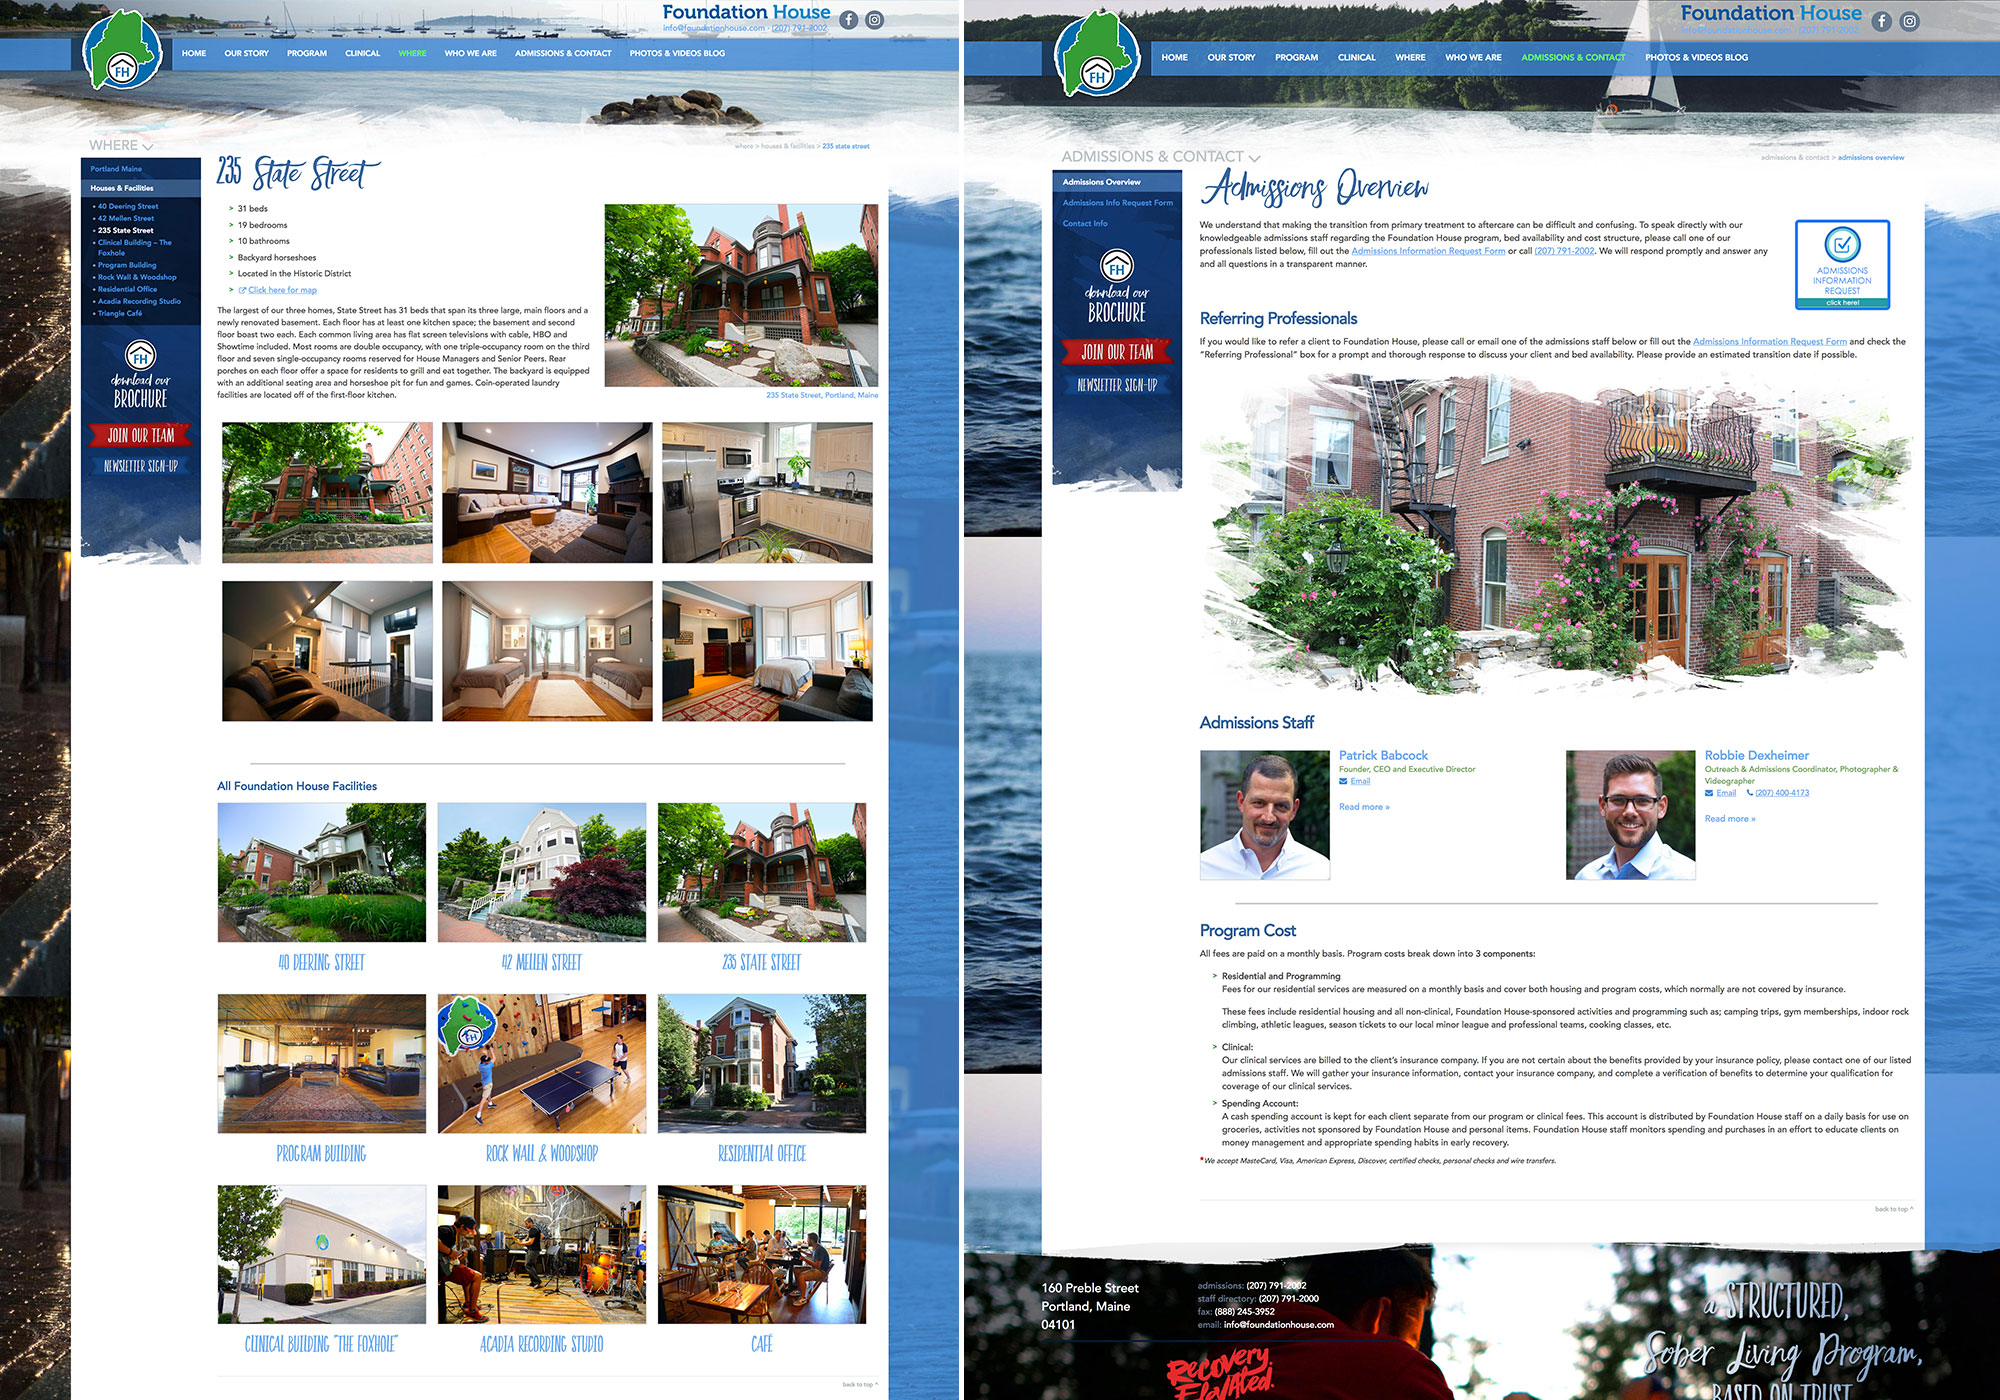 SlickFish designed website for Foundation House. A screenshot of the Facilities and Admissions pages.